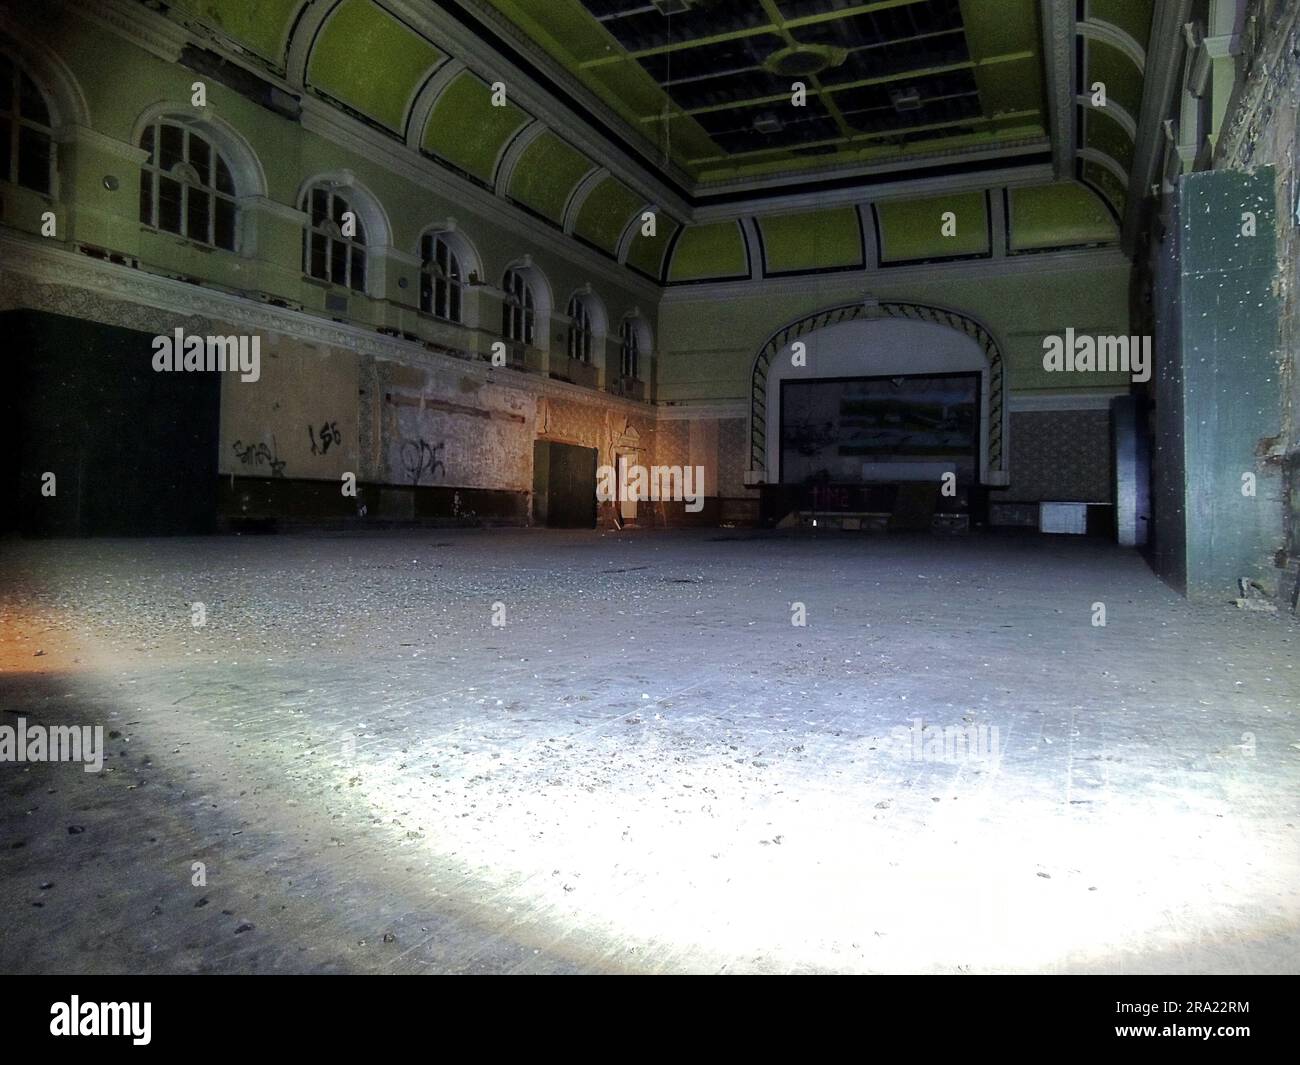 An Expansive Room Now Empty And Disquieting West Yorkshire Uk Chilling Photographs Have Shown